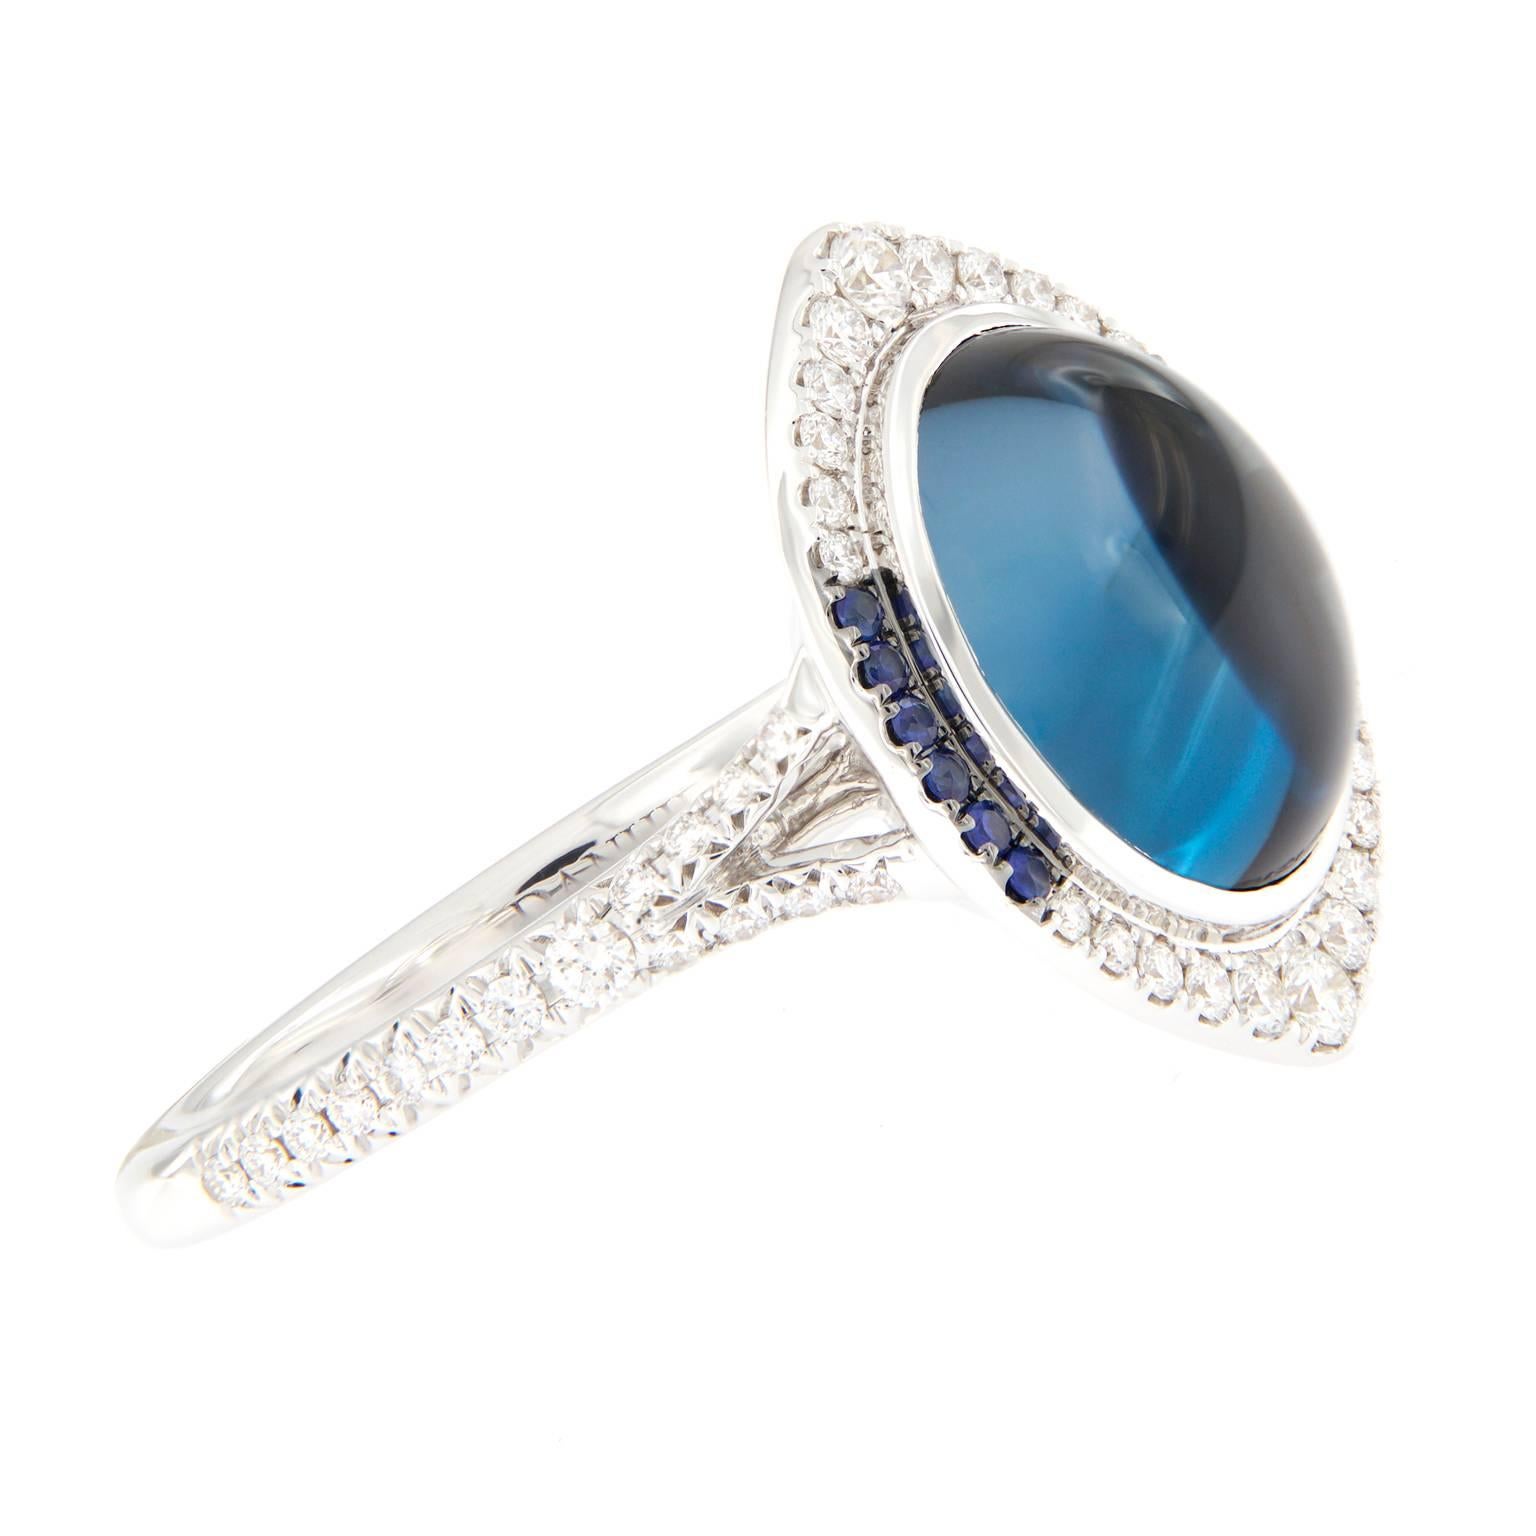 Danhier creation from the Candide Eye Collection. This beautifully crafted ring centers around a 6.14 carat cabochon London blue topaz accented with a halo design of white diamonds and blue sapphires. US ring size 6.75
Weighs 7.9 grams.

Topaz 6.14